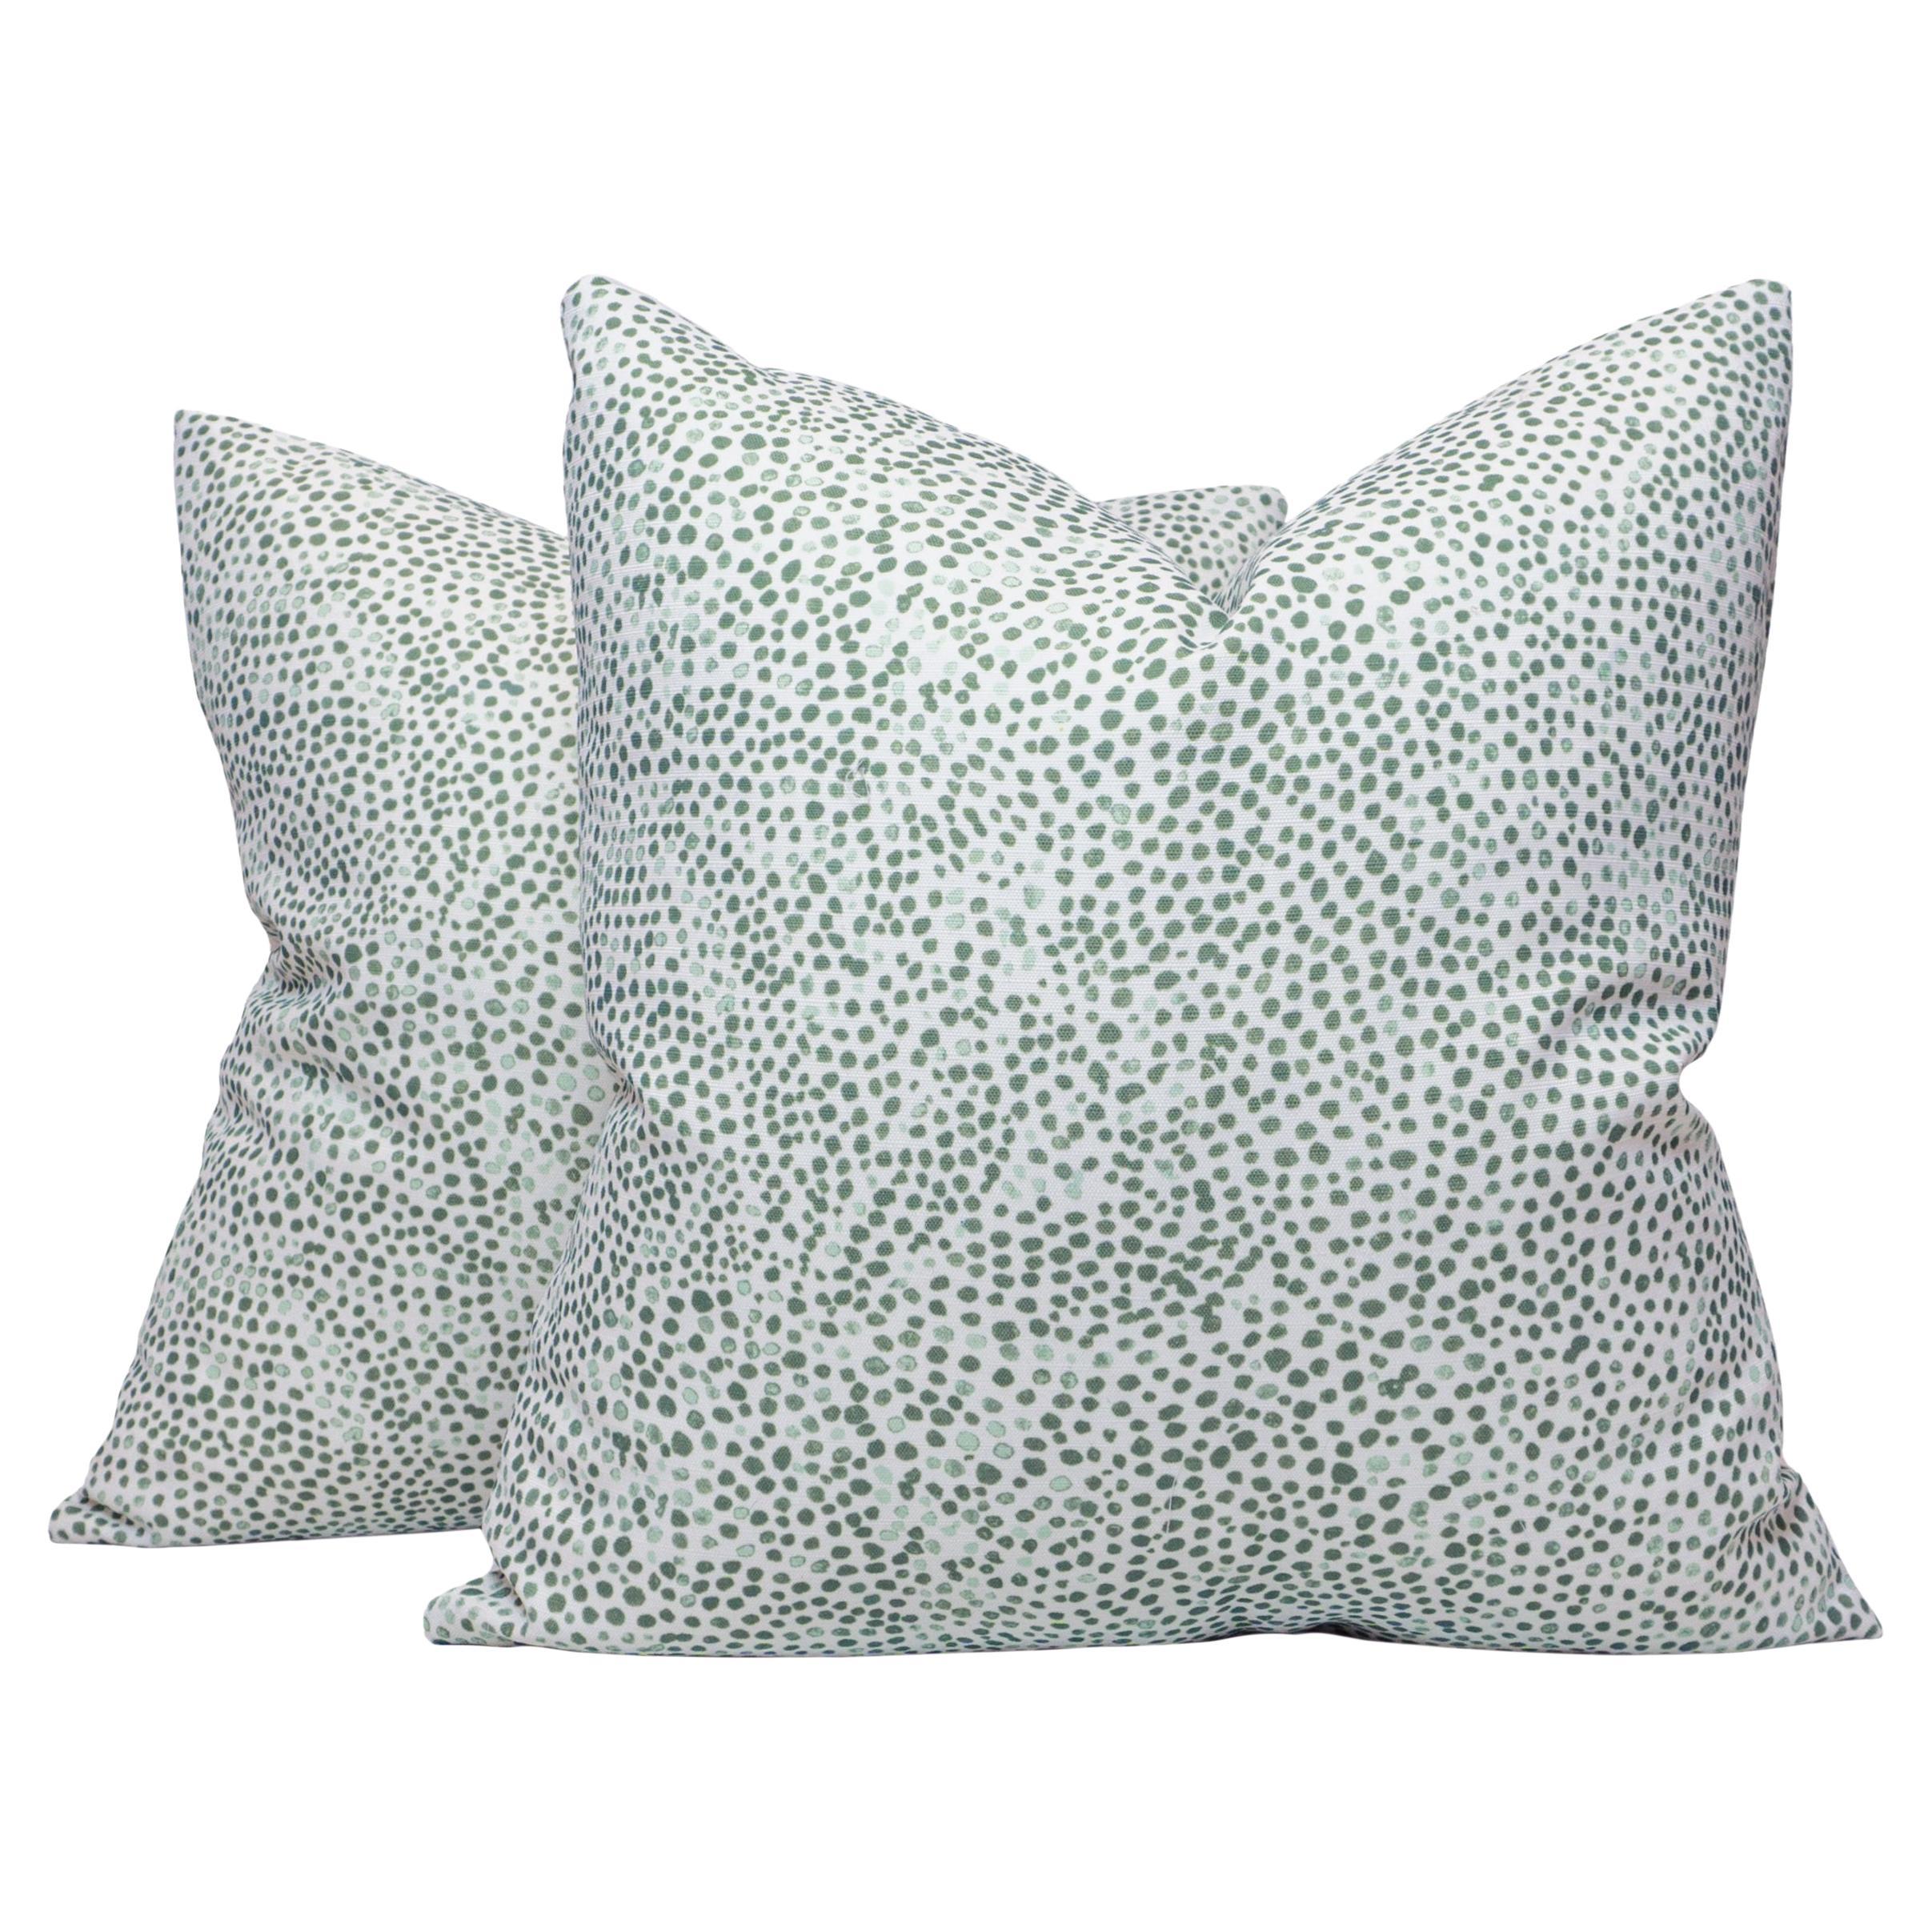 White with Green Dots / Spots Pillows